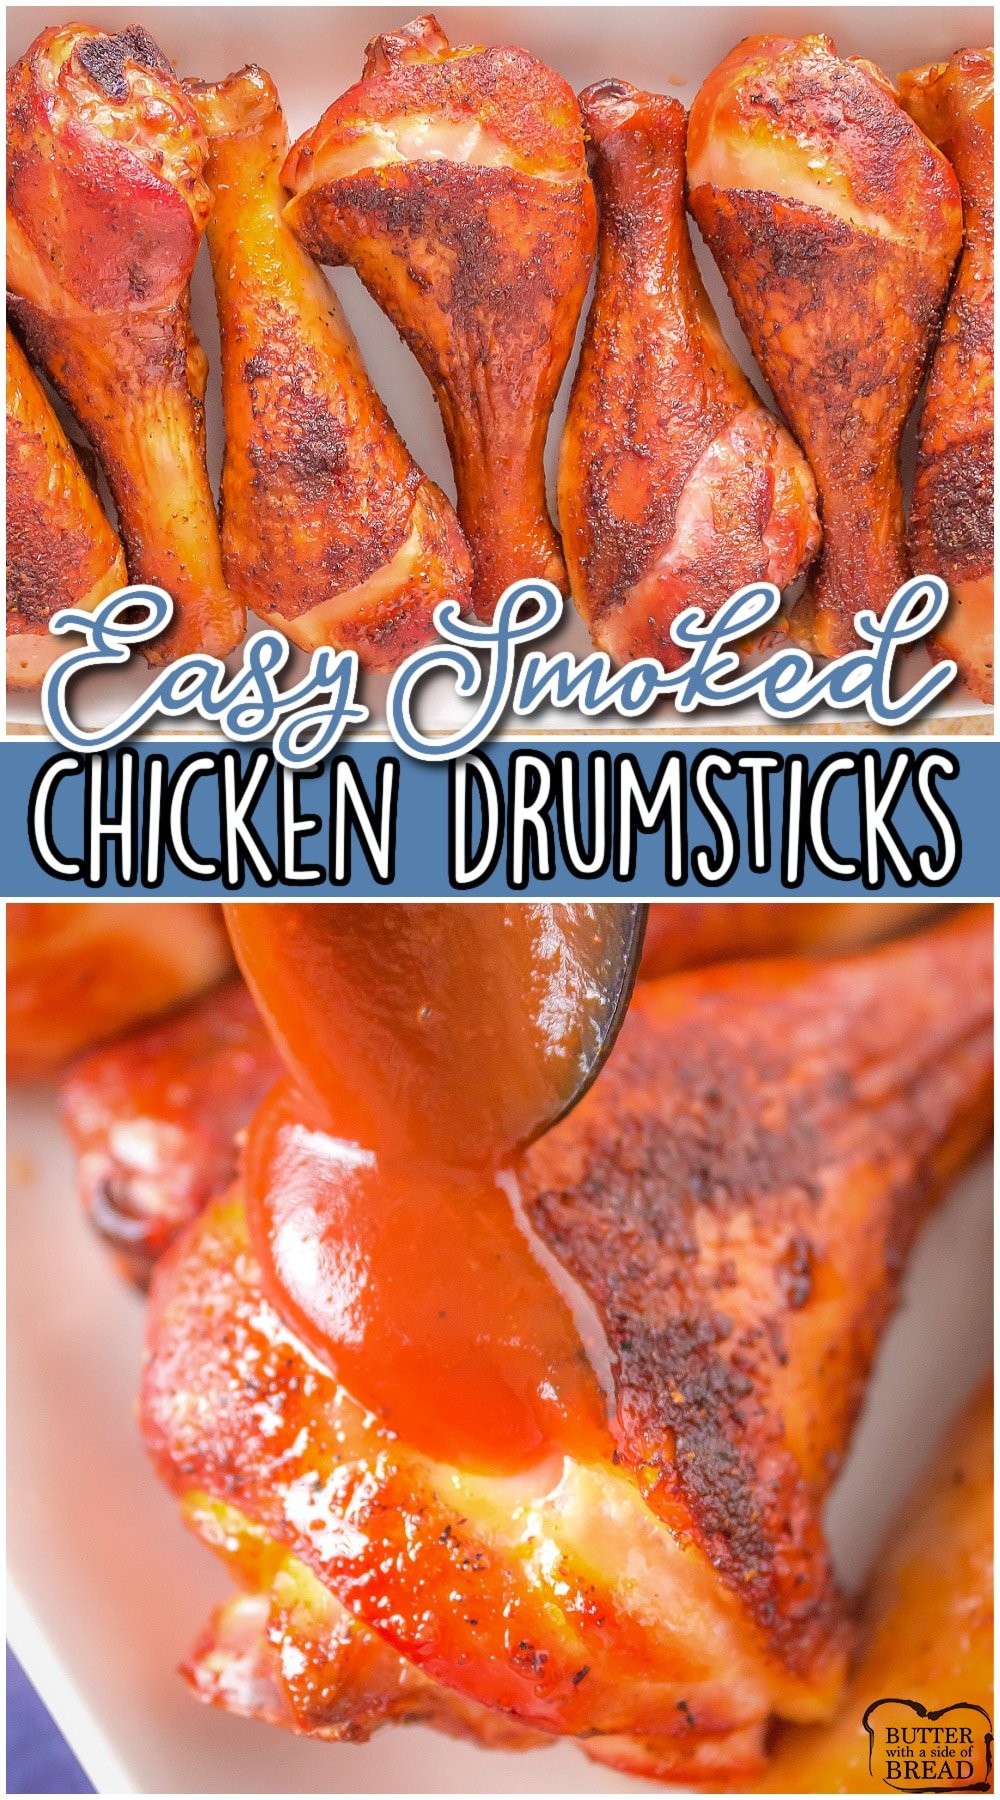 Easy Smoked Chicken Drumsticks are packed with flavor, perfectly juicy and are so easy to prepare! These smoker chicken drumsticks have minimal prep work without sacrificing flavor and amazing results.